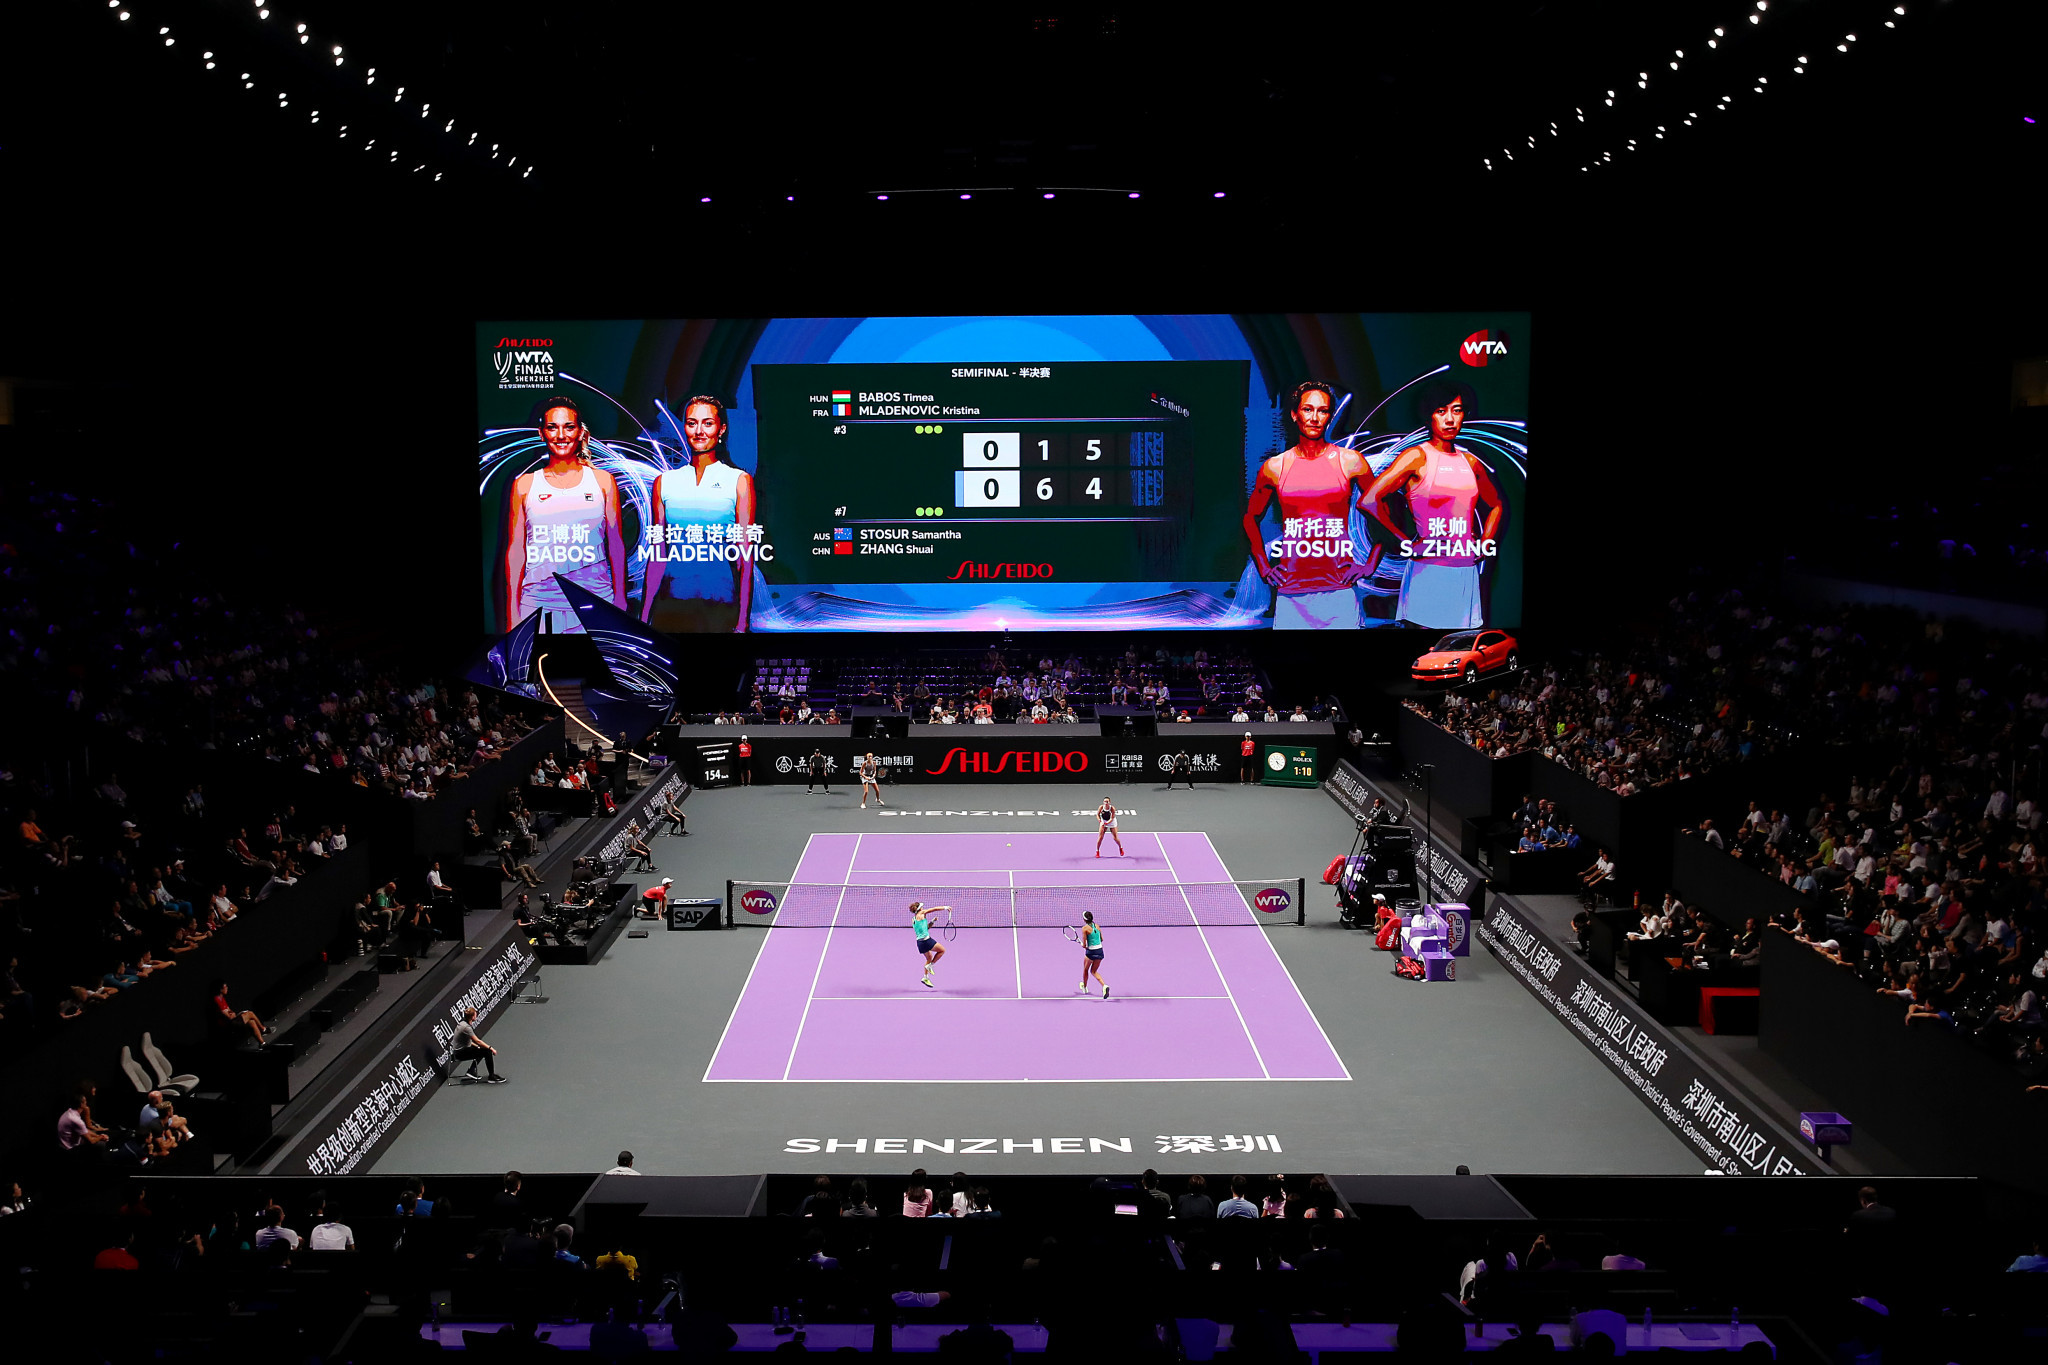 Shenzhen in China had been due to host the WTA Finals from 2022 to 2030, but missed out on this year's edition despite the WTA's controversial return after the Peng Shuai scandal ©Getty Images